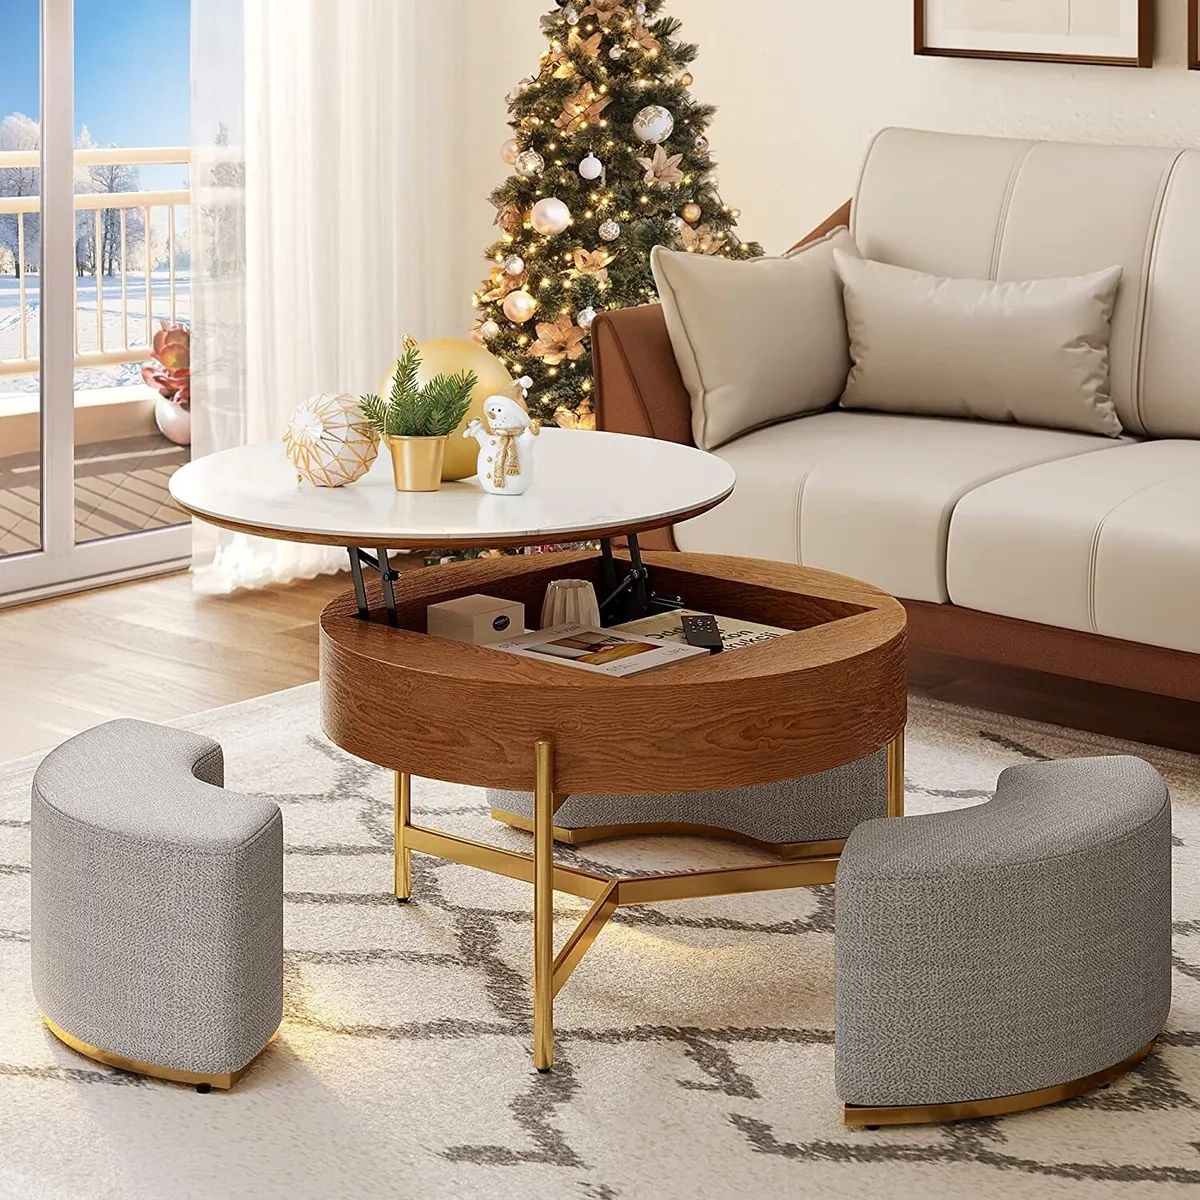 Lift Top Round Coffee Table With Hidden Storage Compartment 3 Stools Living  Room | Ebay Within Modern Coffee Tables With Hidden Storage Compartments (View 4 of 15)